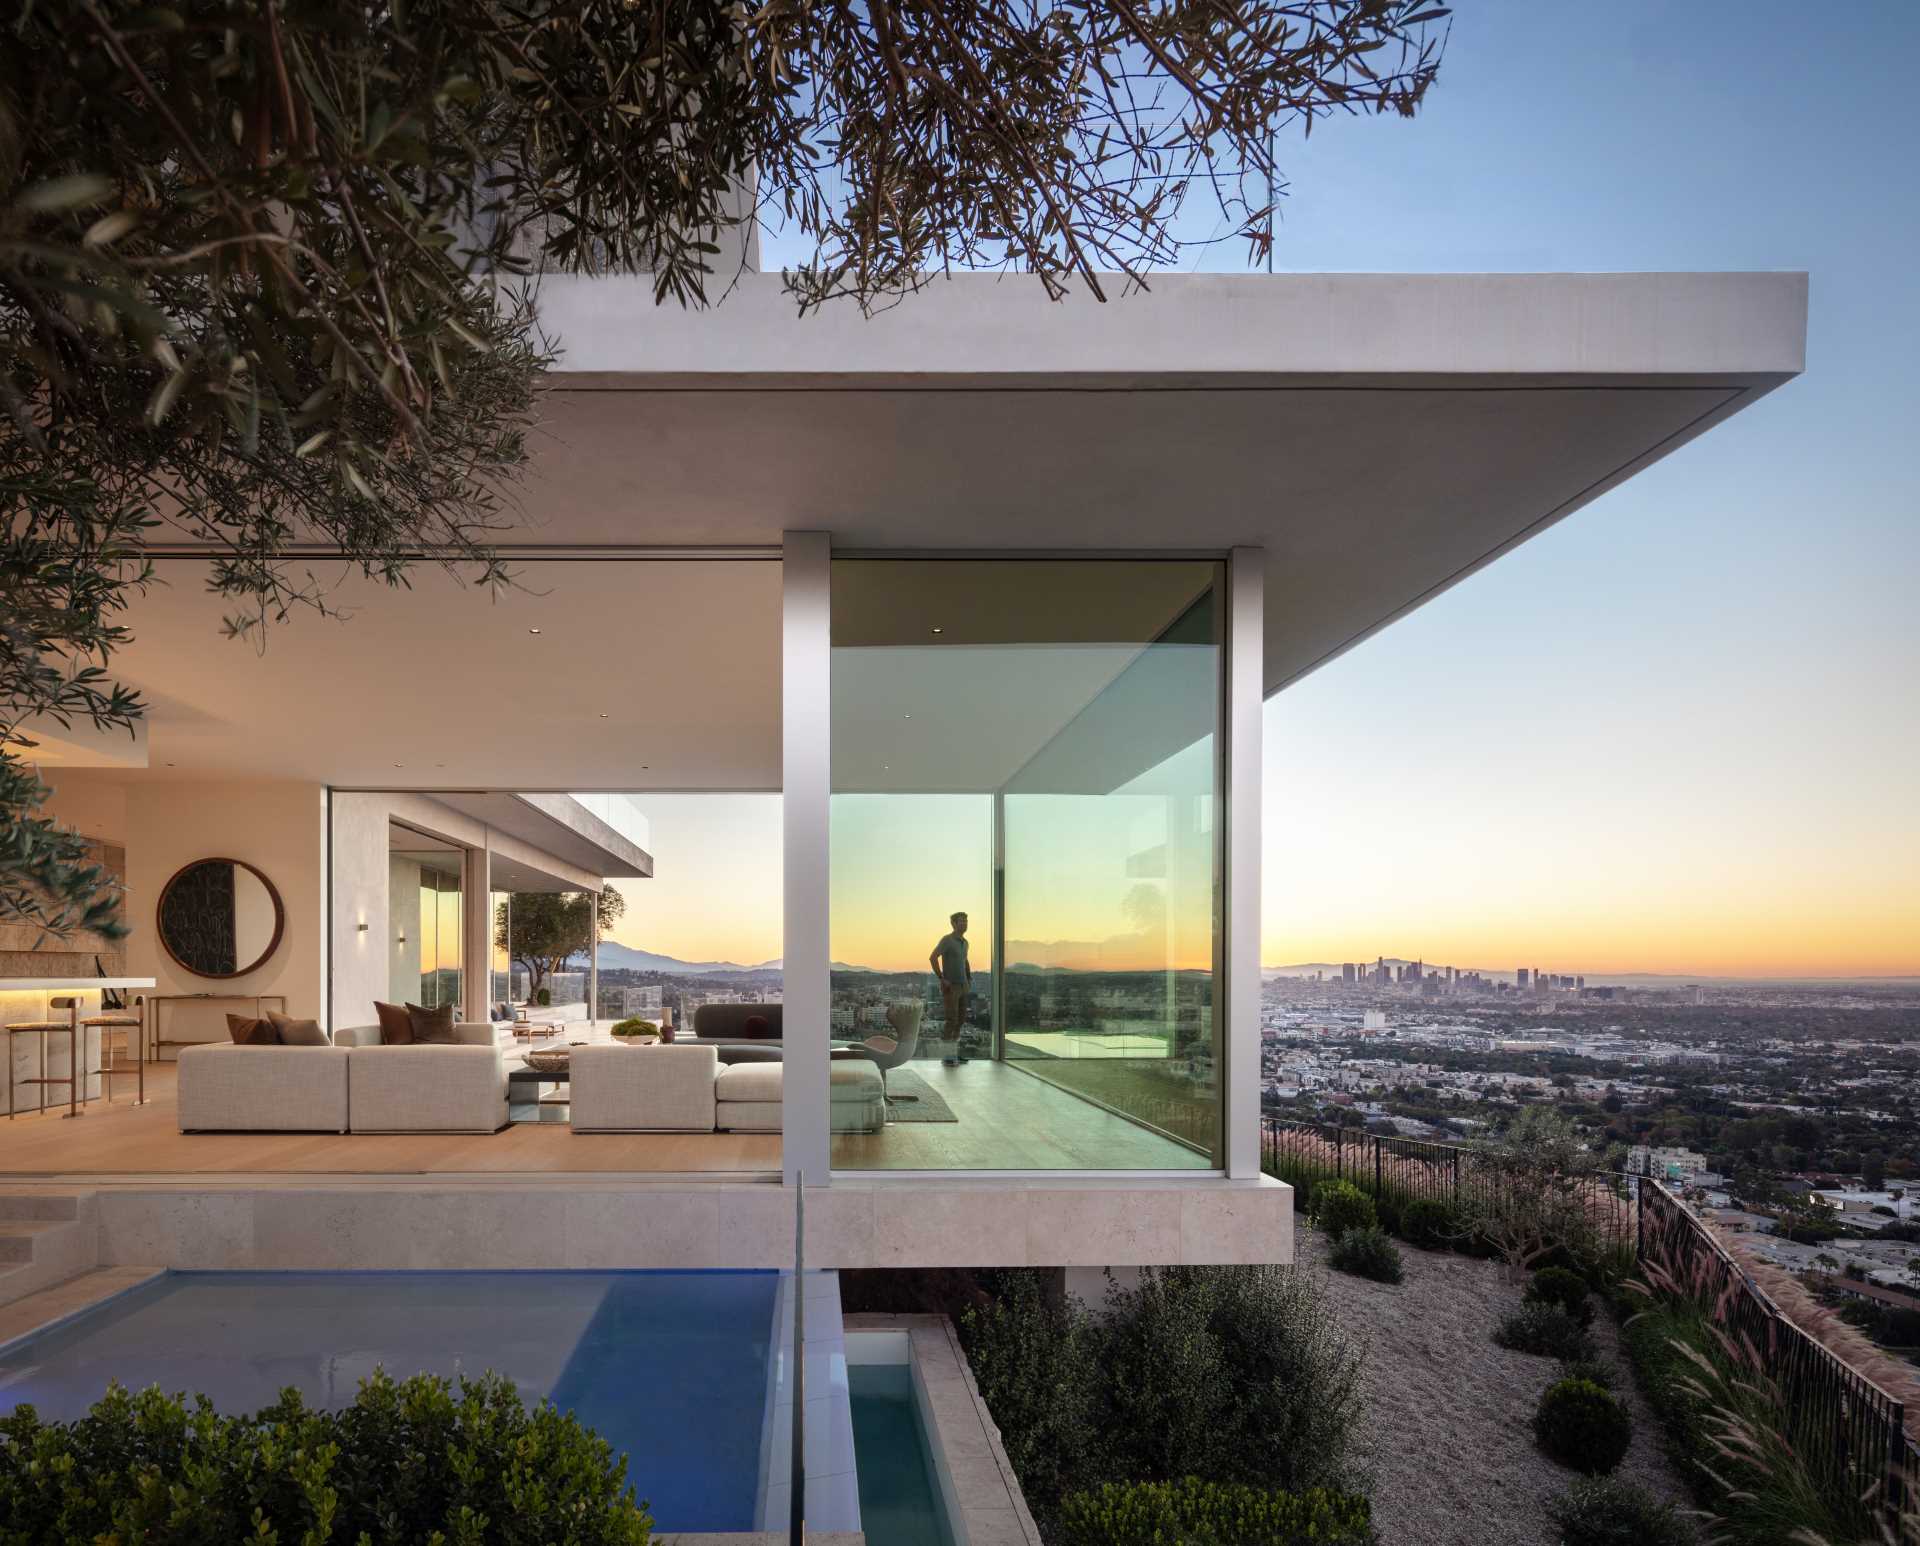 Cape Town based architecture firm SAOTA, has recently completed a new home in Los Angeles, California, that draws inspiration from the famous Stahl House, designed by Pierre Koenig.